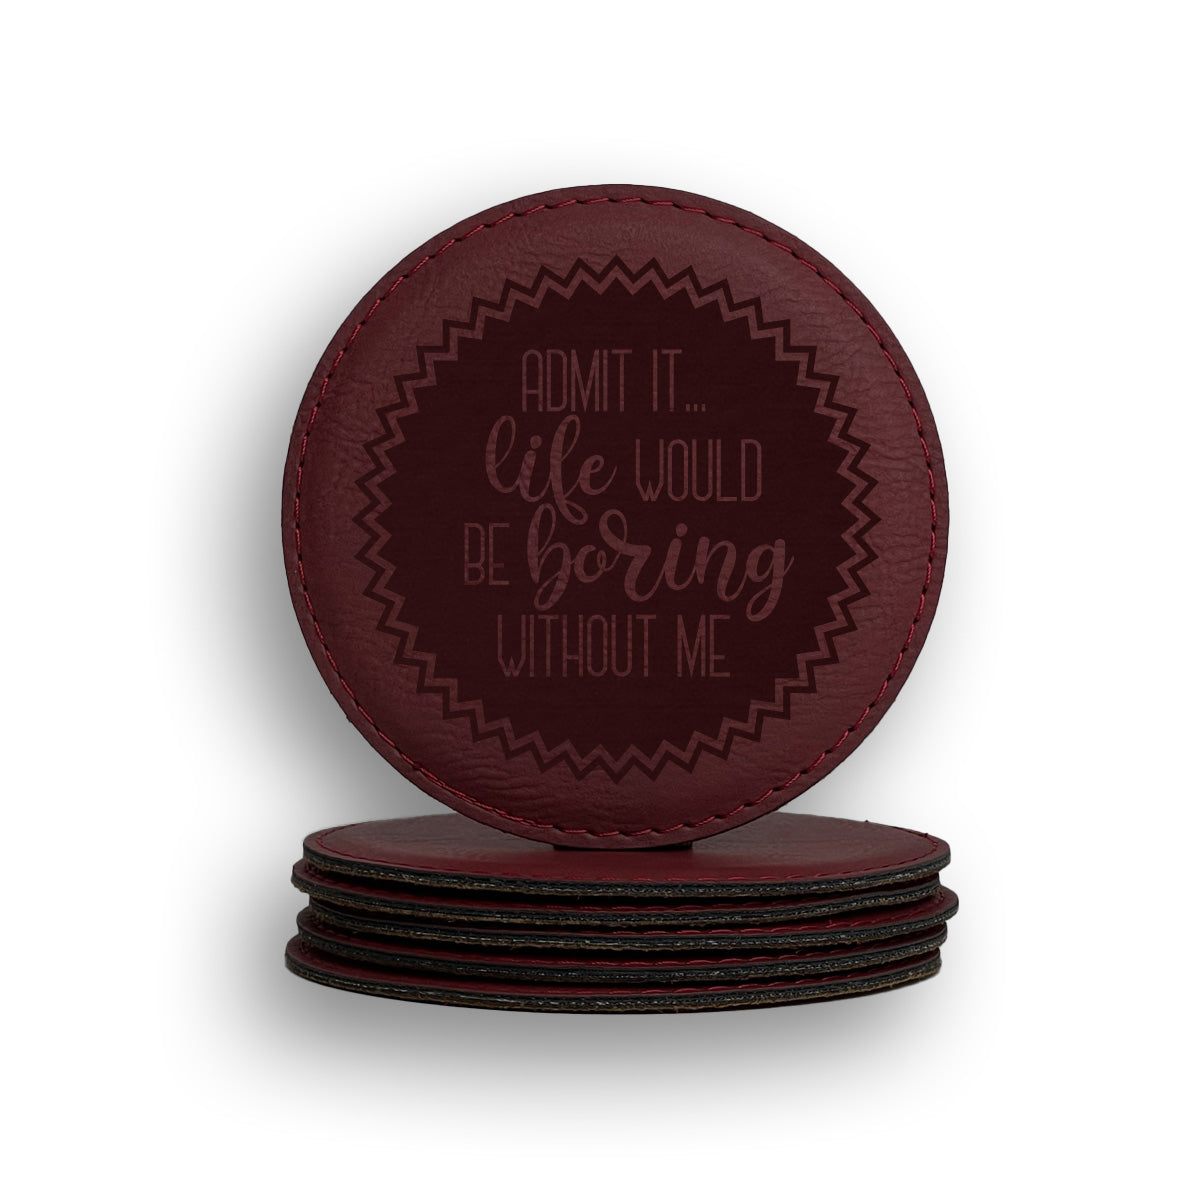 Admit It Life Would Be Boring Without Me Coaster